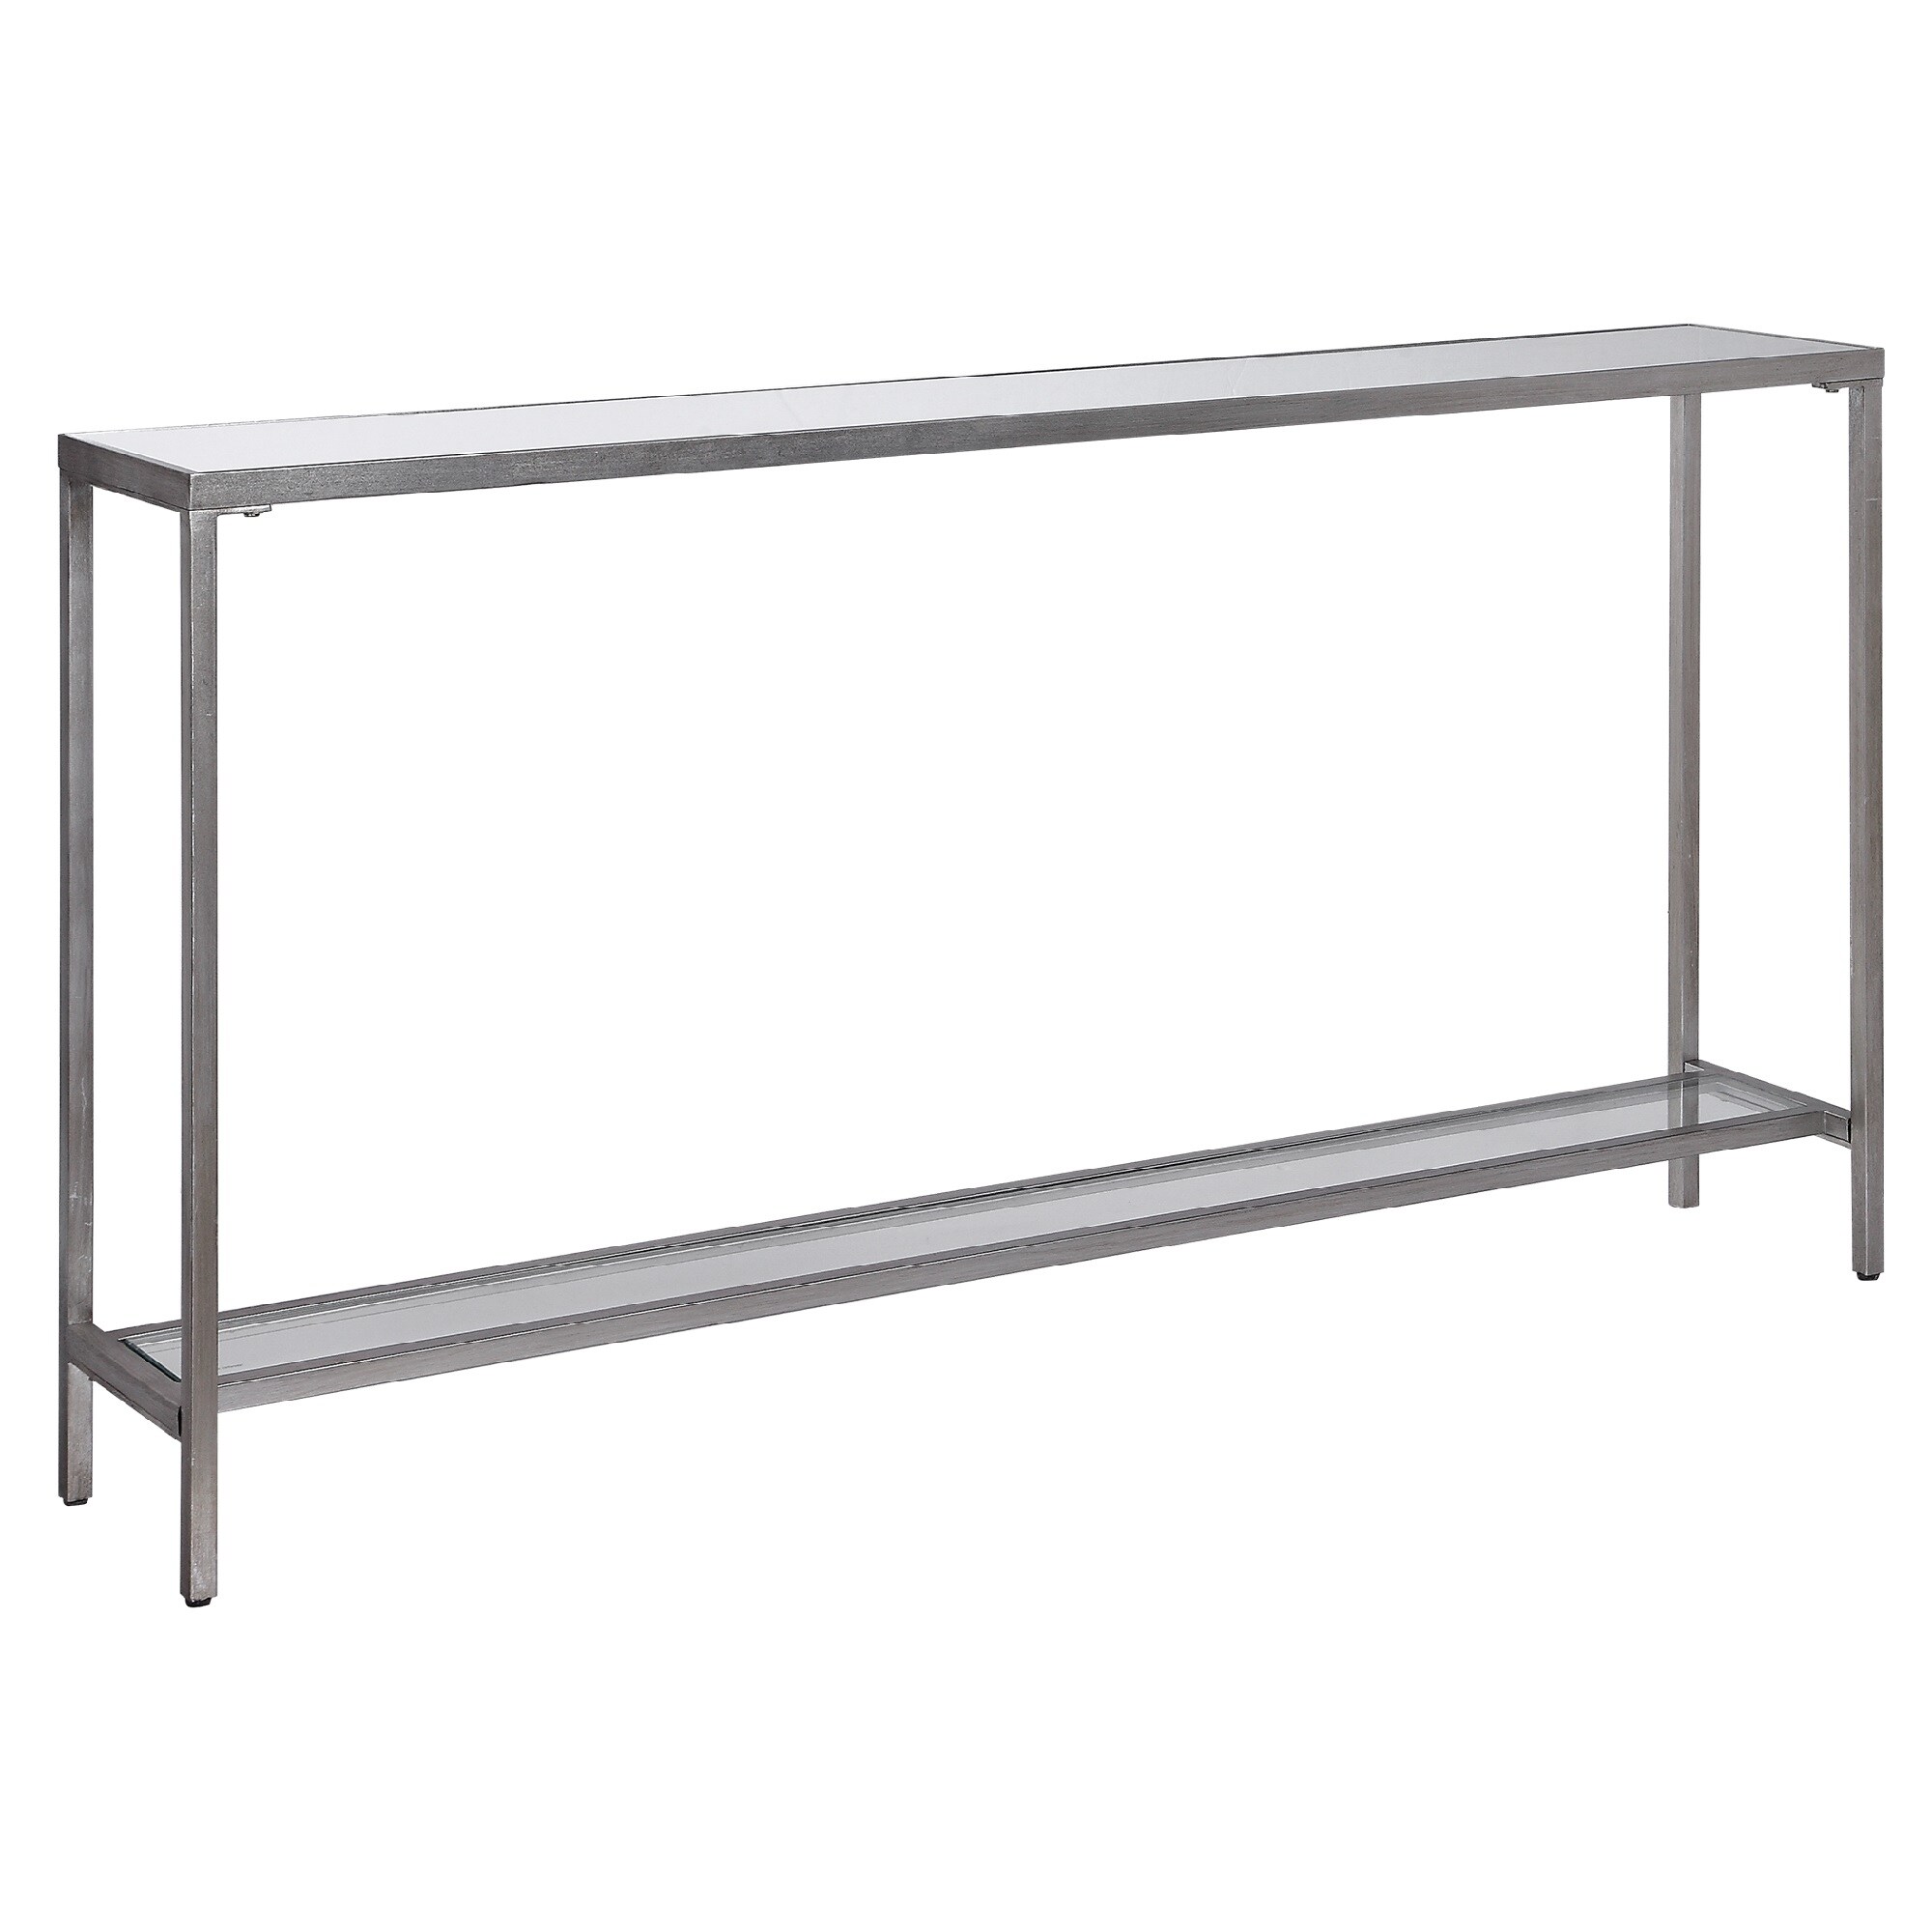 60” Silver Minimalist Console Table with a Storage Shelf